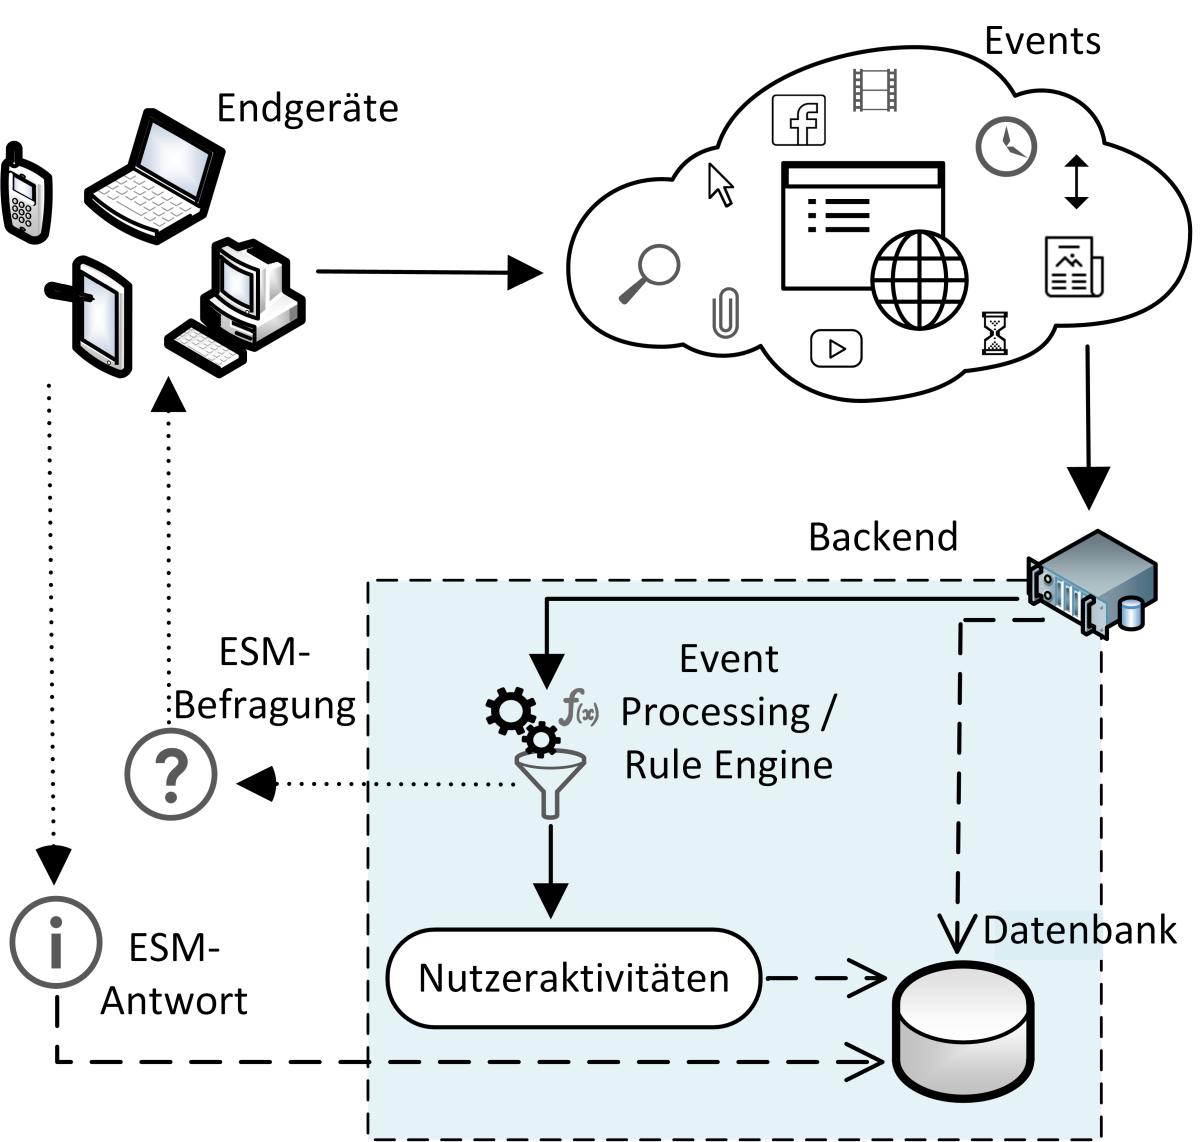 The interaction of events, end devices, backend with databases and user activities in clarification